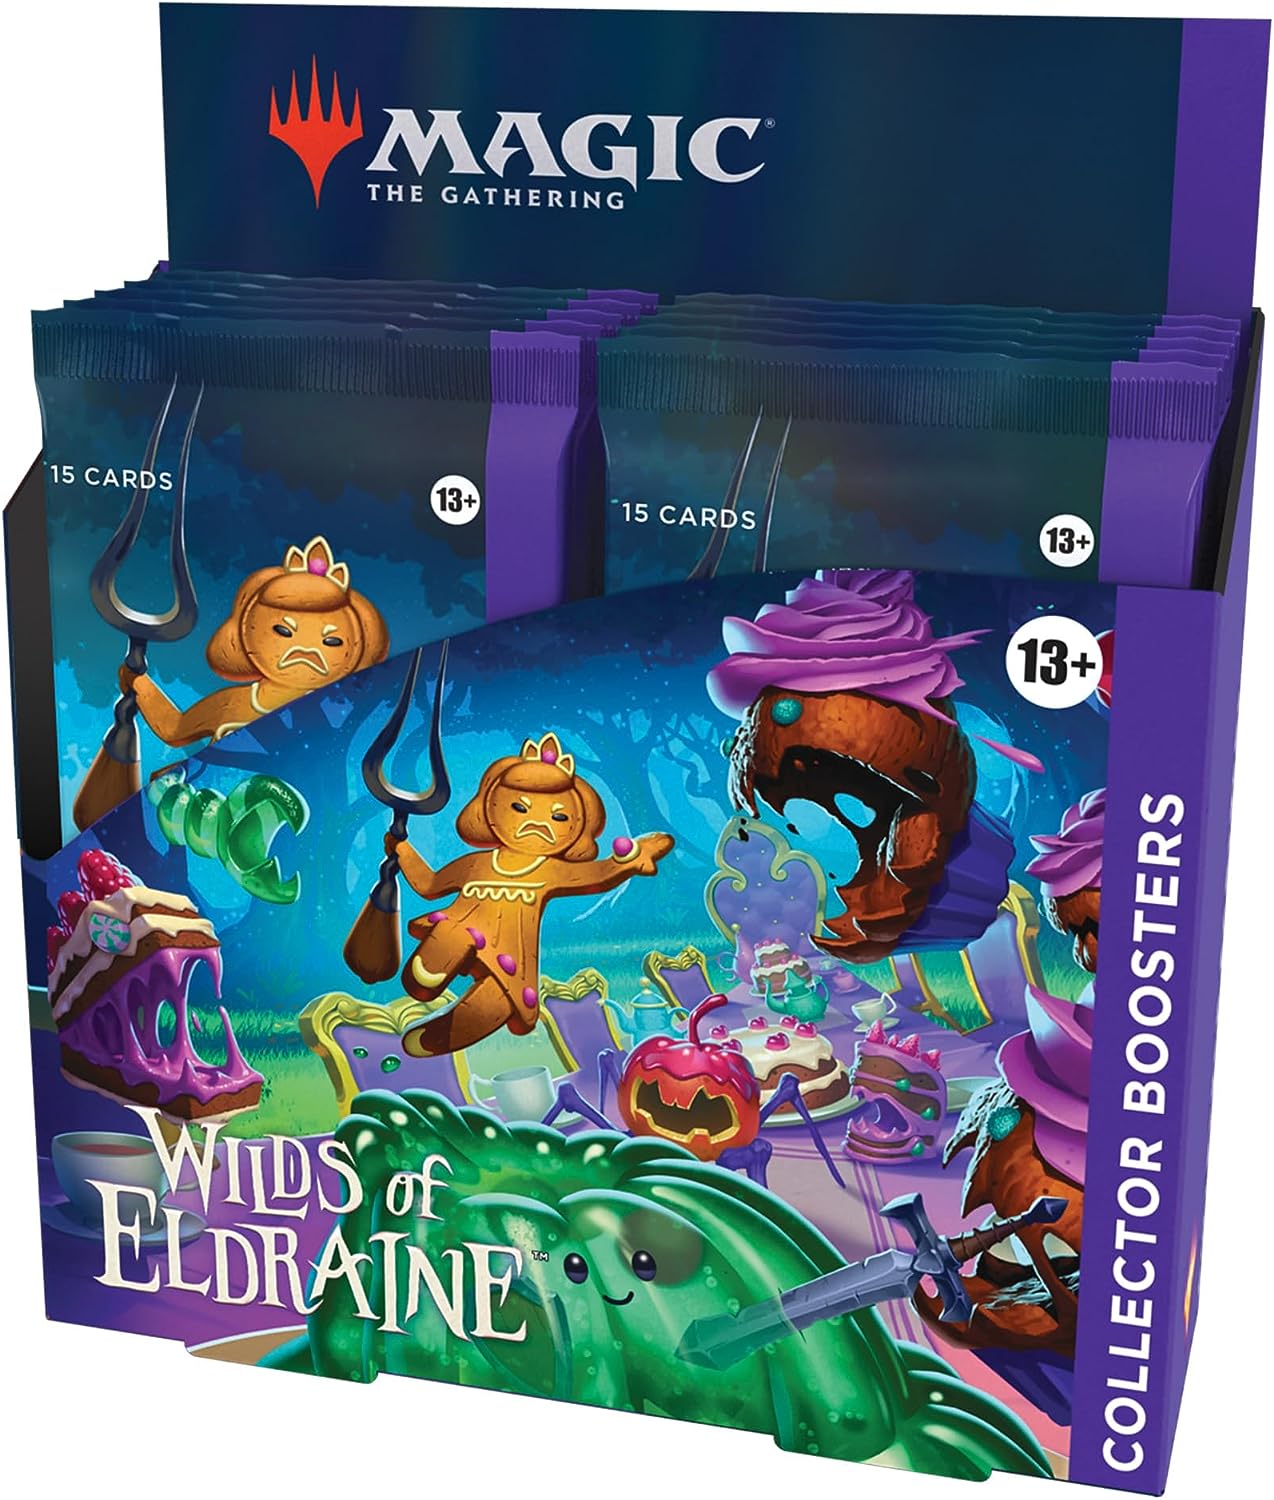 Magic The Gathering Wilds of Eldraine Collector Booster Box (English Ver.)